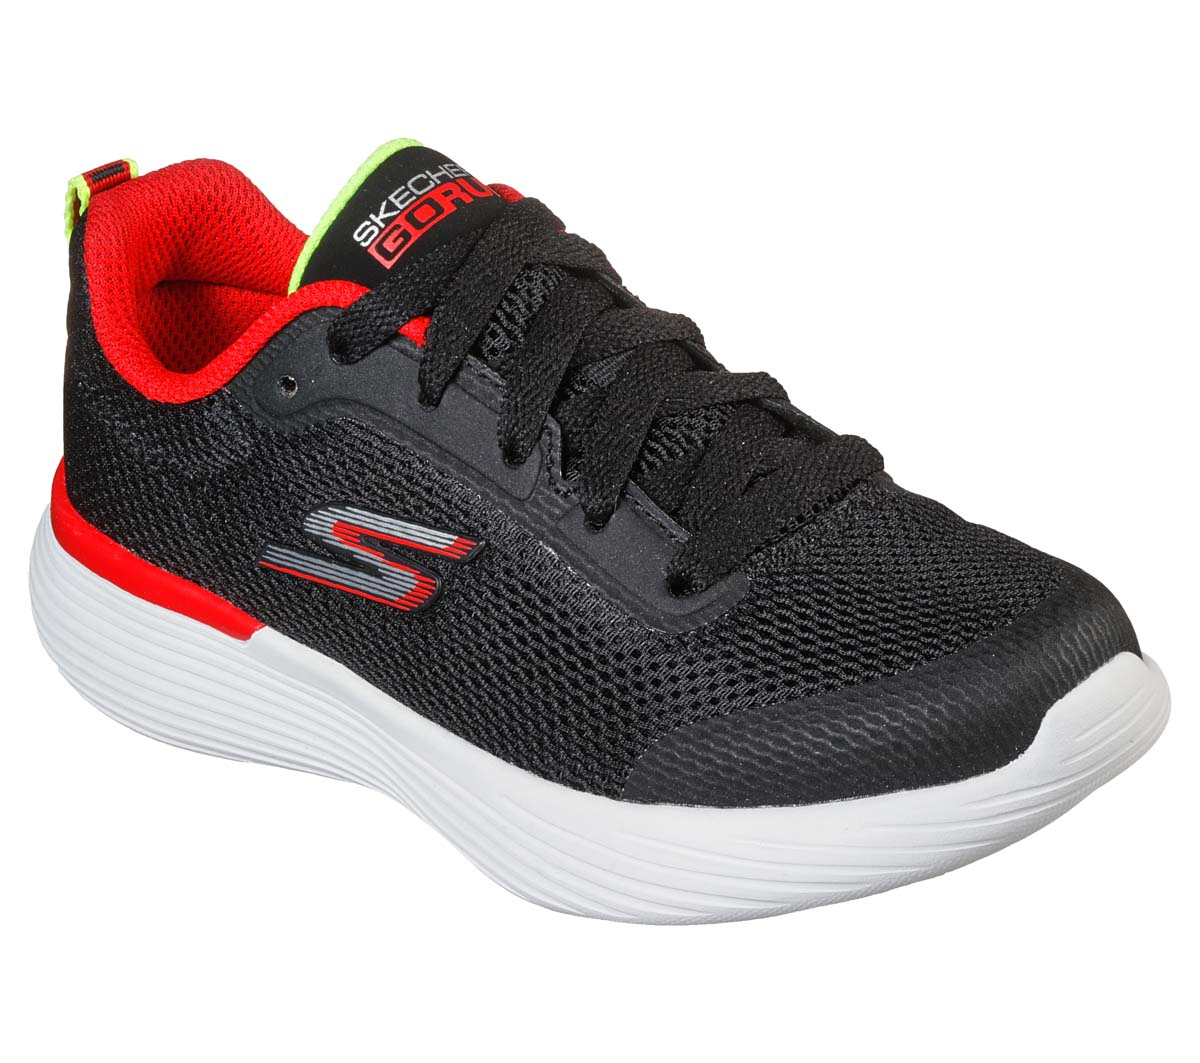 Skechers Go Run 400 Lace Black Red Kids Trainers 405100L In Size 39 In Plain Black Red For kids